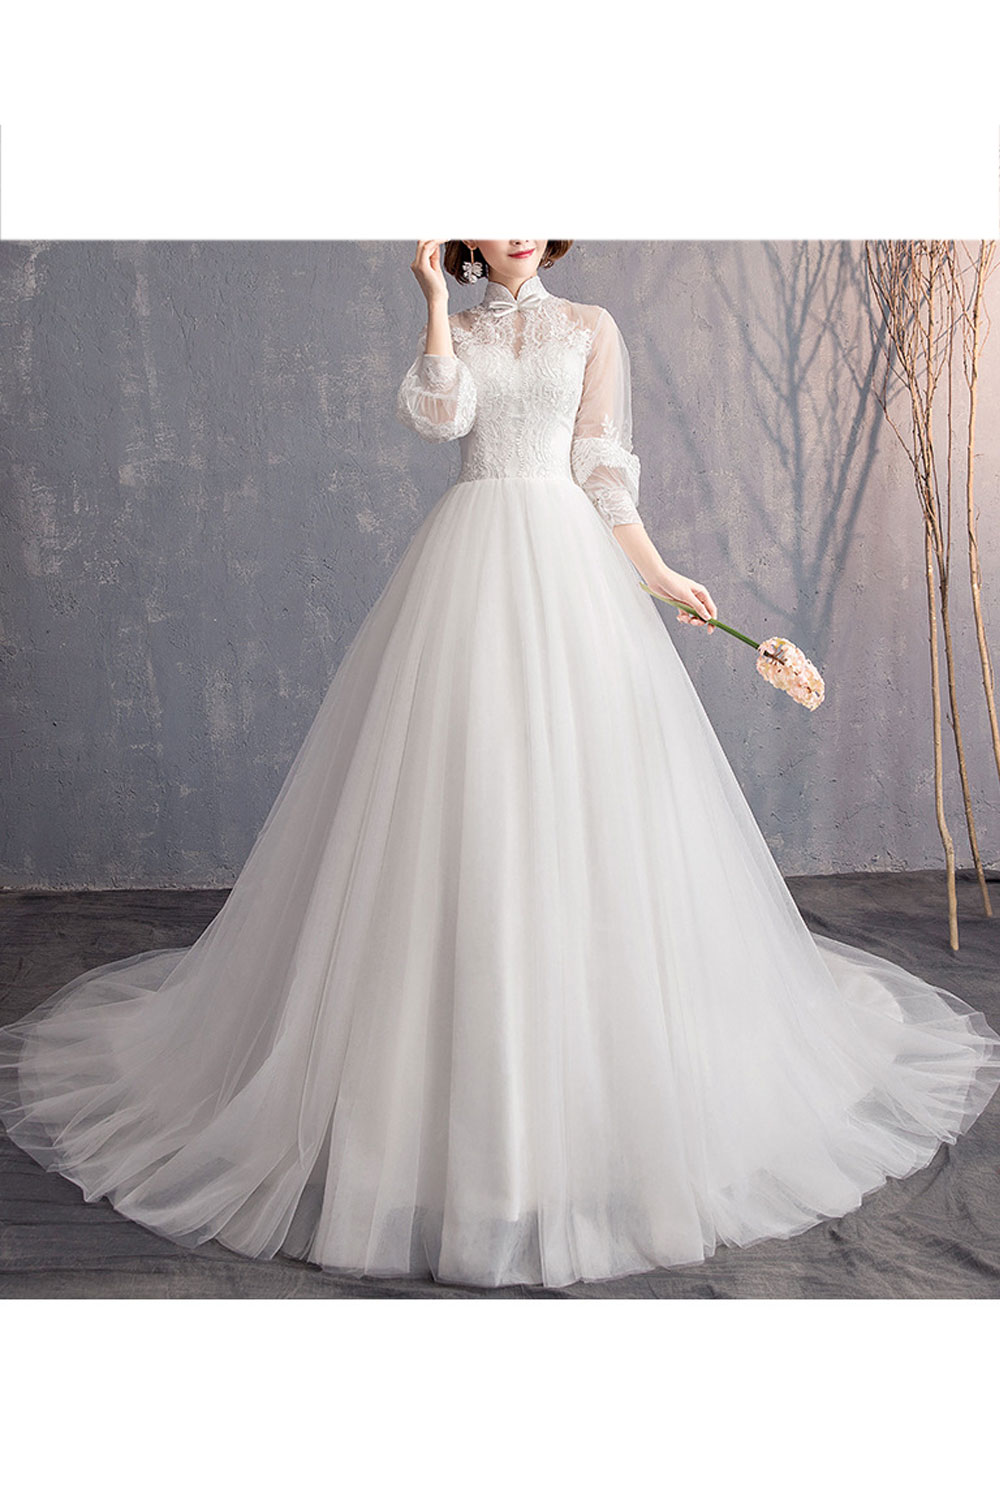 Tom Carry Women Comfy Stand Collar Long Tail Solid Pattern Wedding Dress